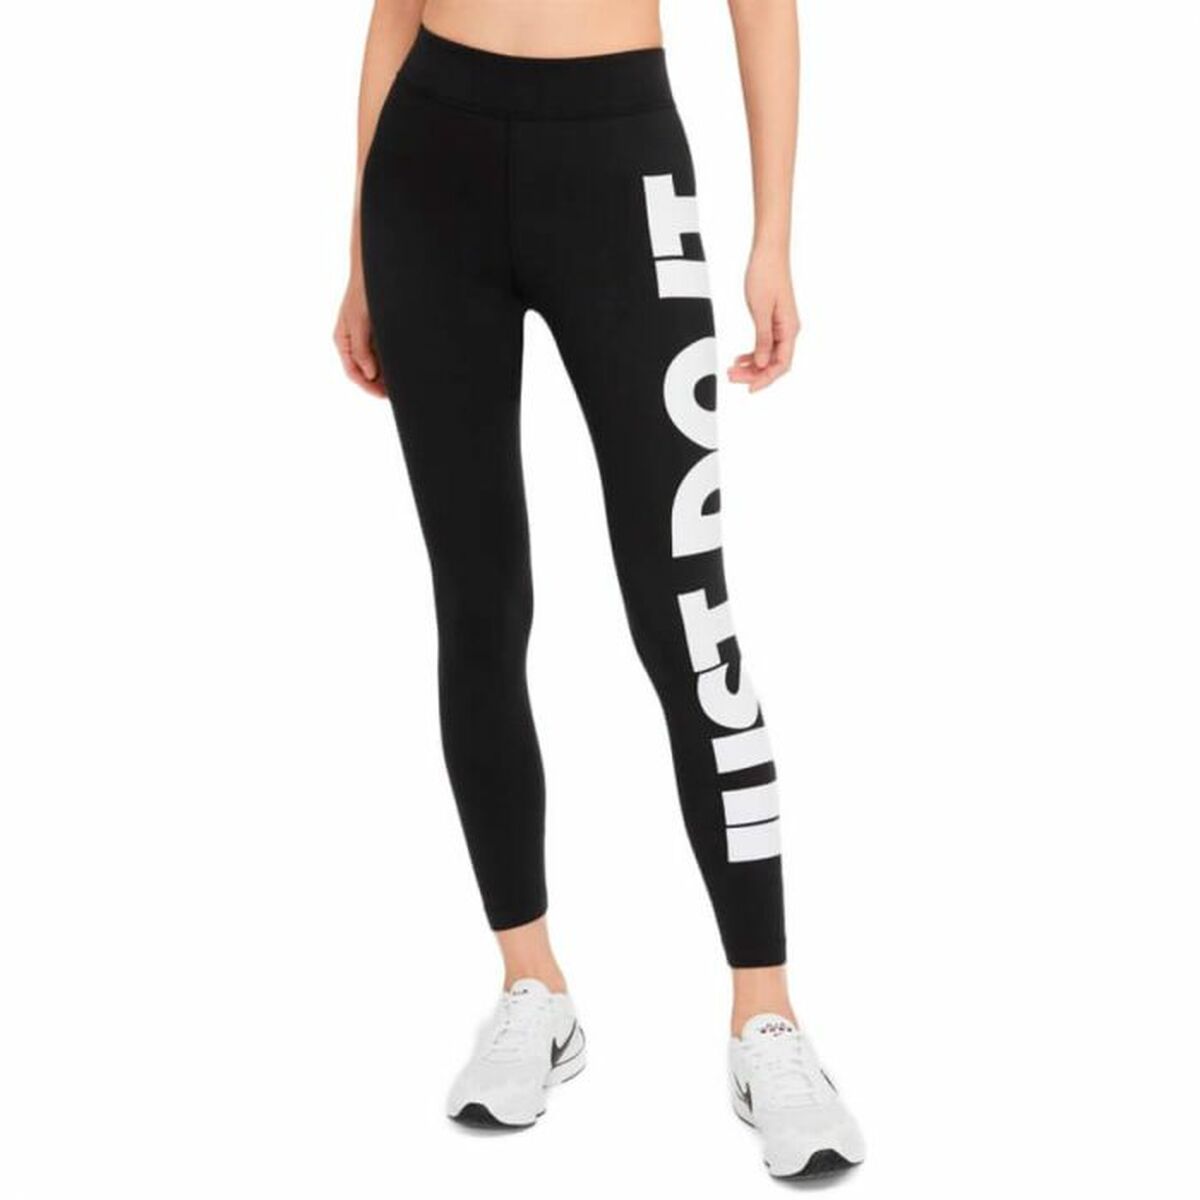 Sport leggings for Women Nike CZ8534 010 Black - best prices in Albania and  fast delivery